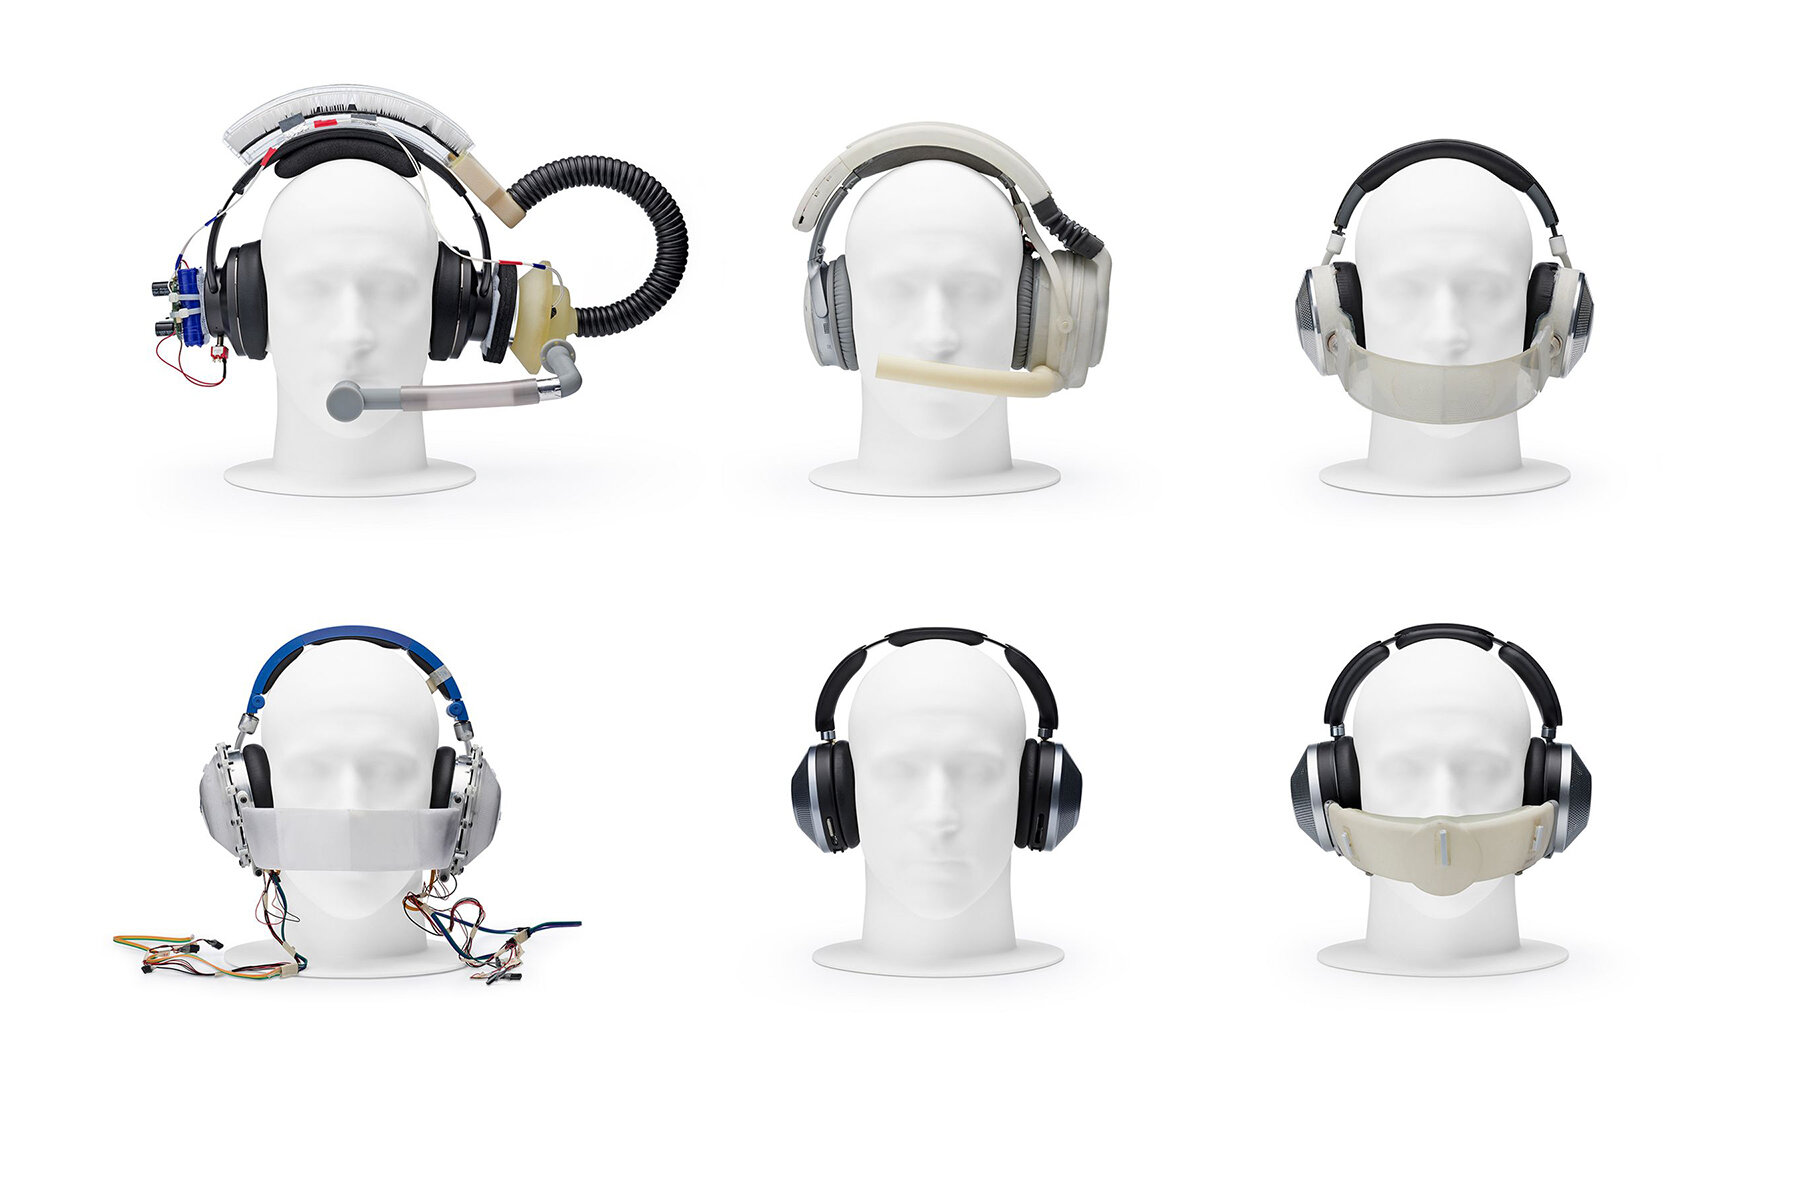 dyson launches its bizarre combo of noise-canceling headphones and  pollution mask